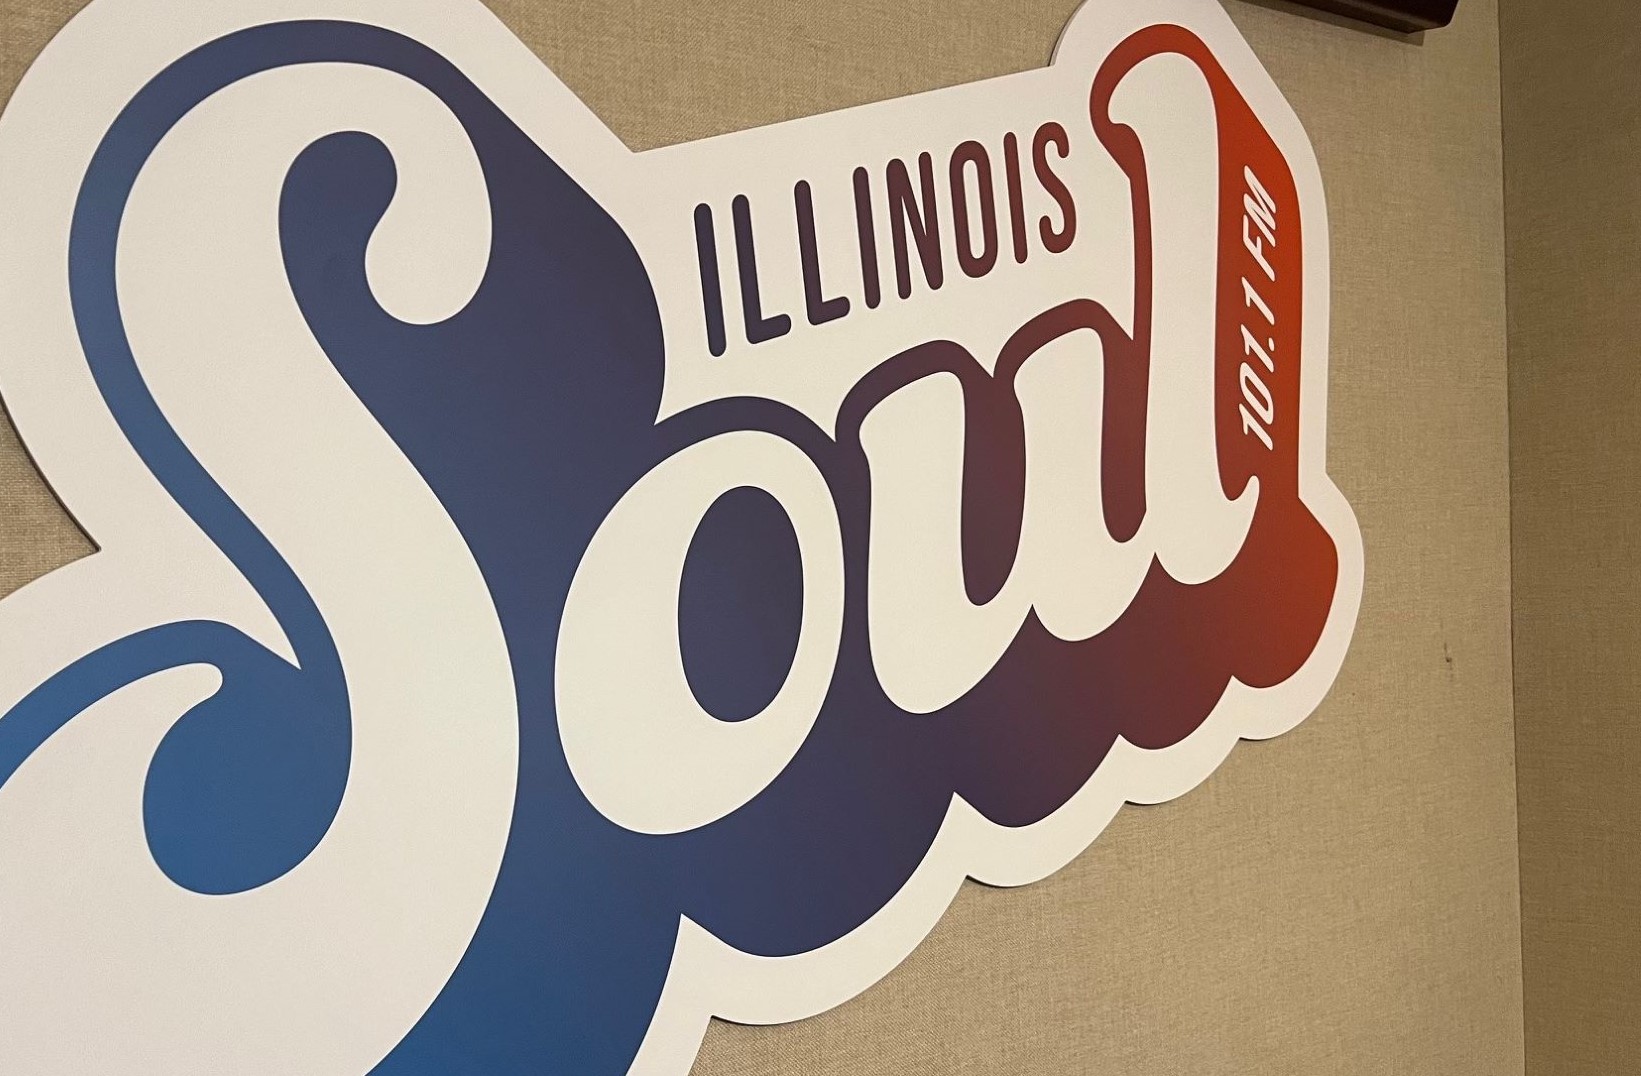 The Illinois Soul logo...Illinois is in small block letters above the larger Soul in thick lettering.